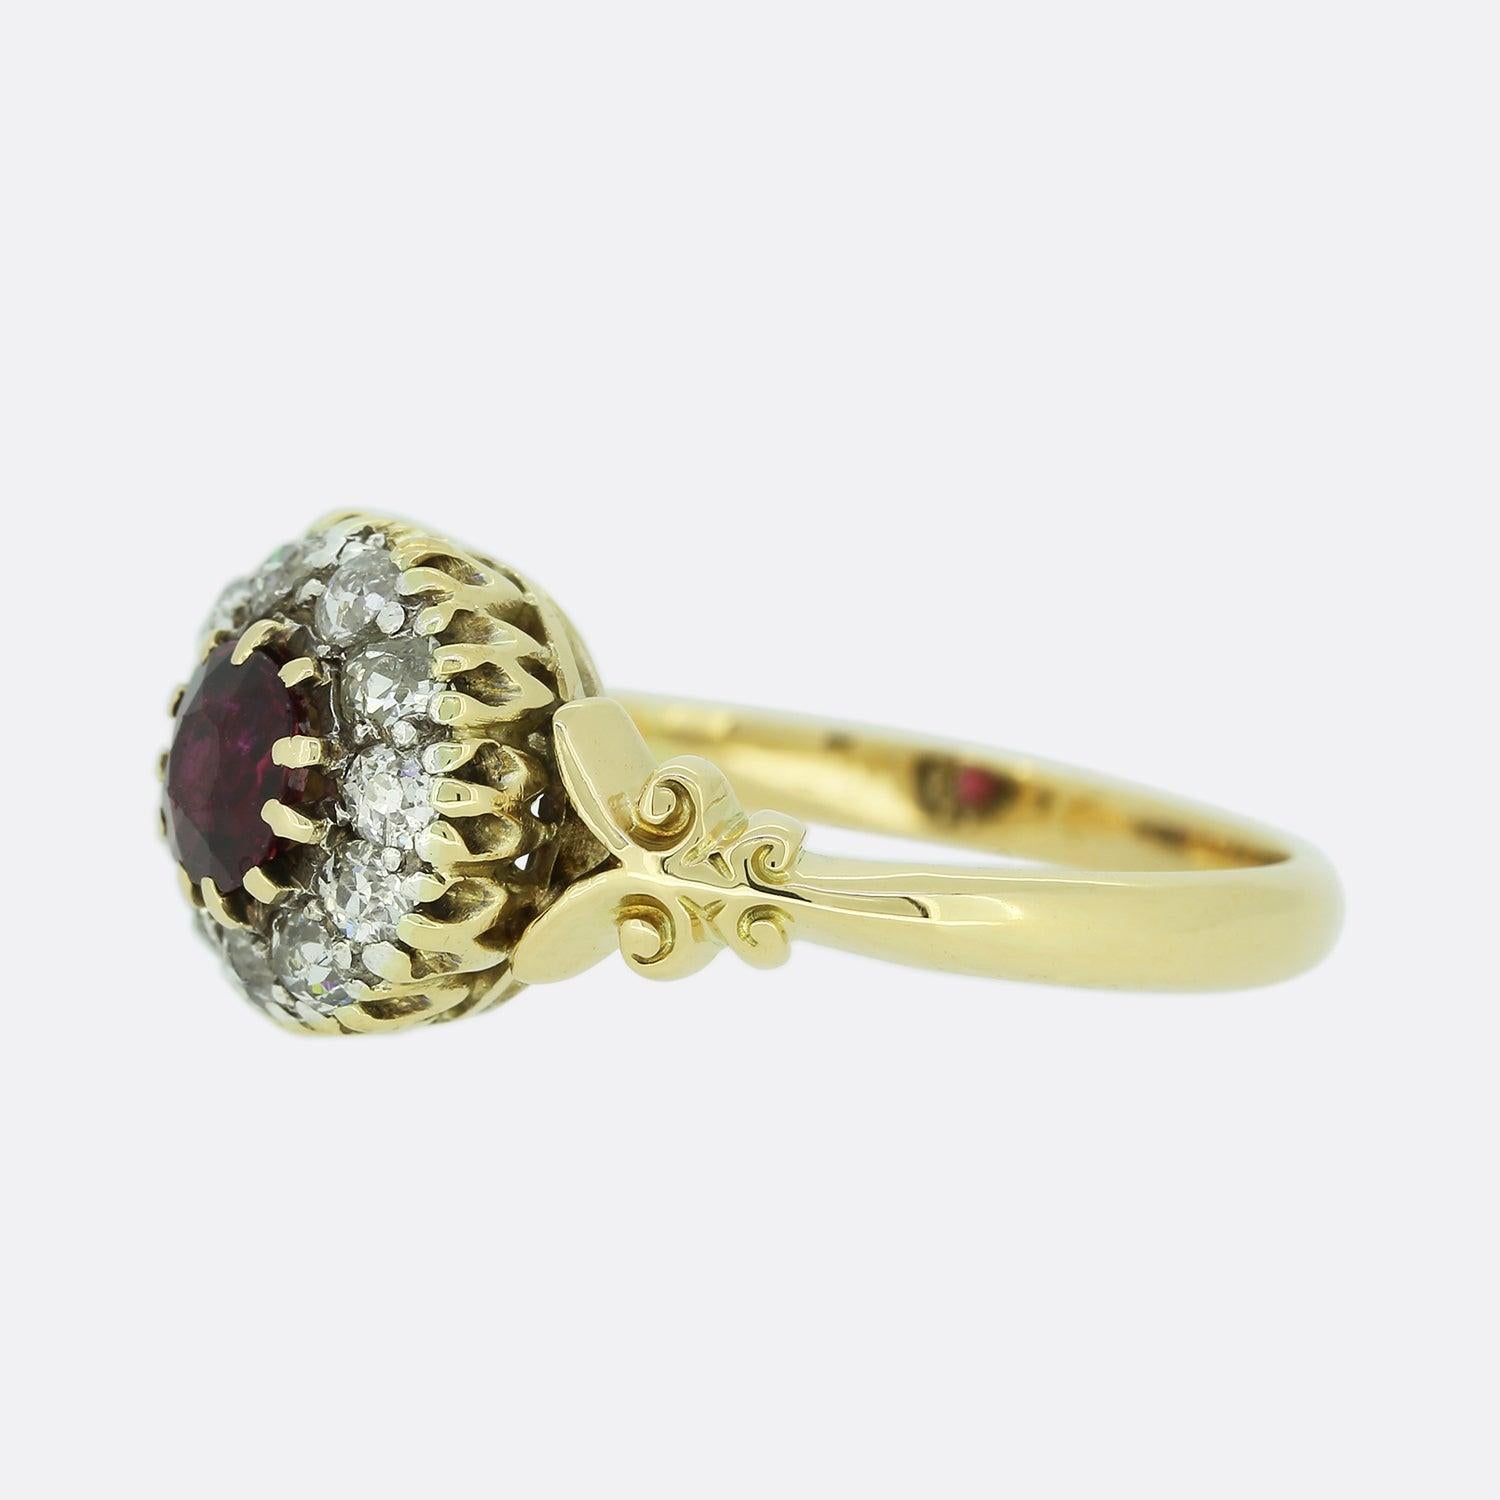 This is an 18ct yellow gold ruby and diamond cluster ring. The ring dates back to the Edwardian era and features a central dark red ruby which is highly complimented by the surrounding bright white old cut diamonds. 

Condition: Used (Very